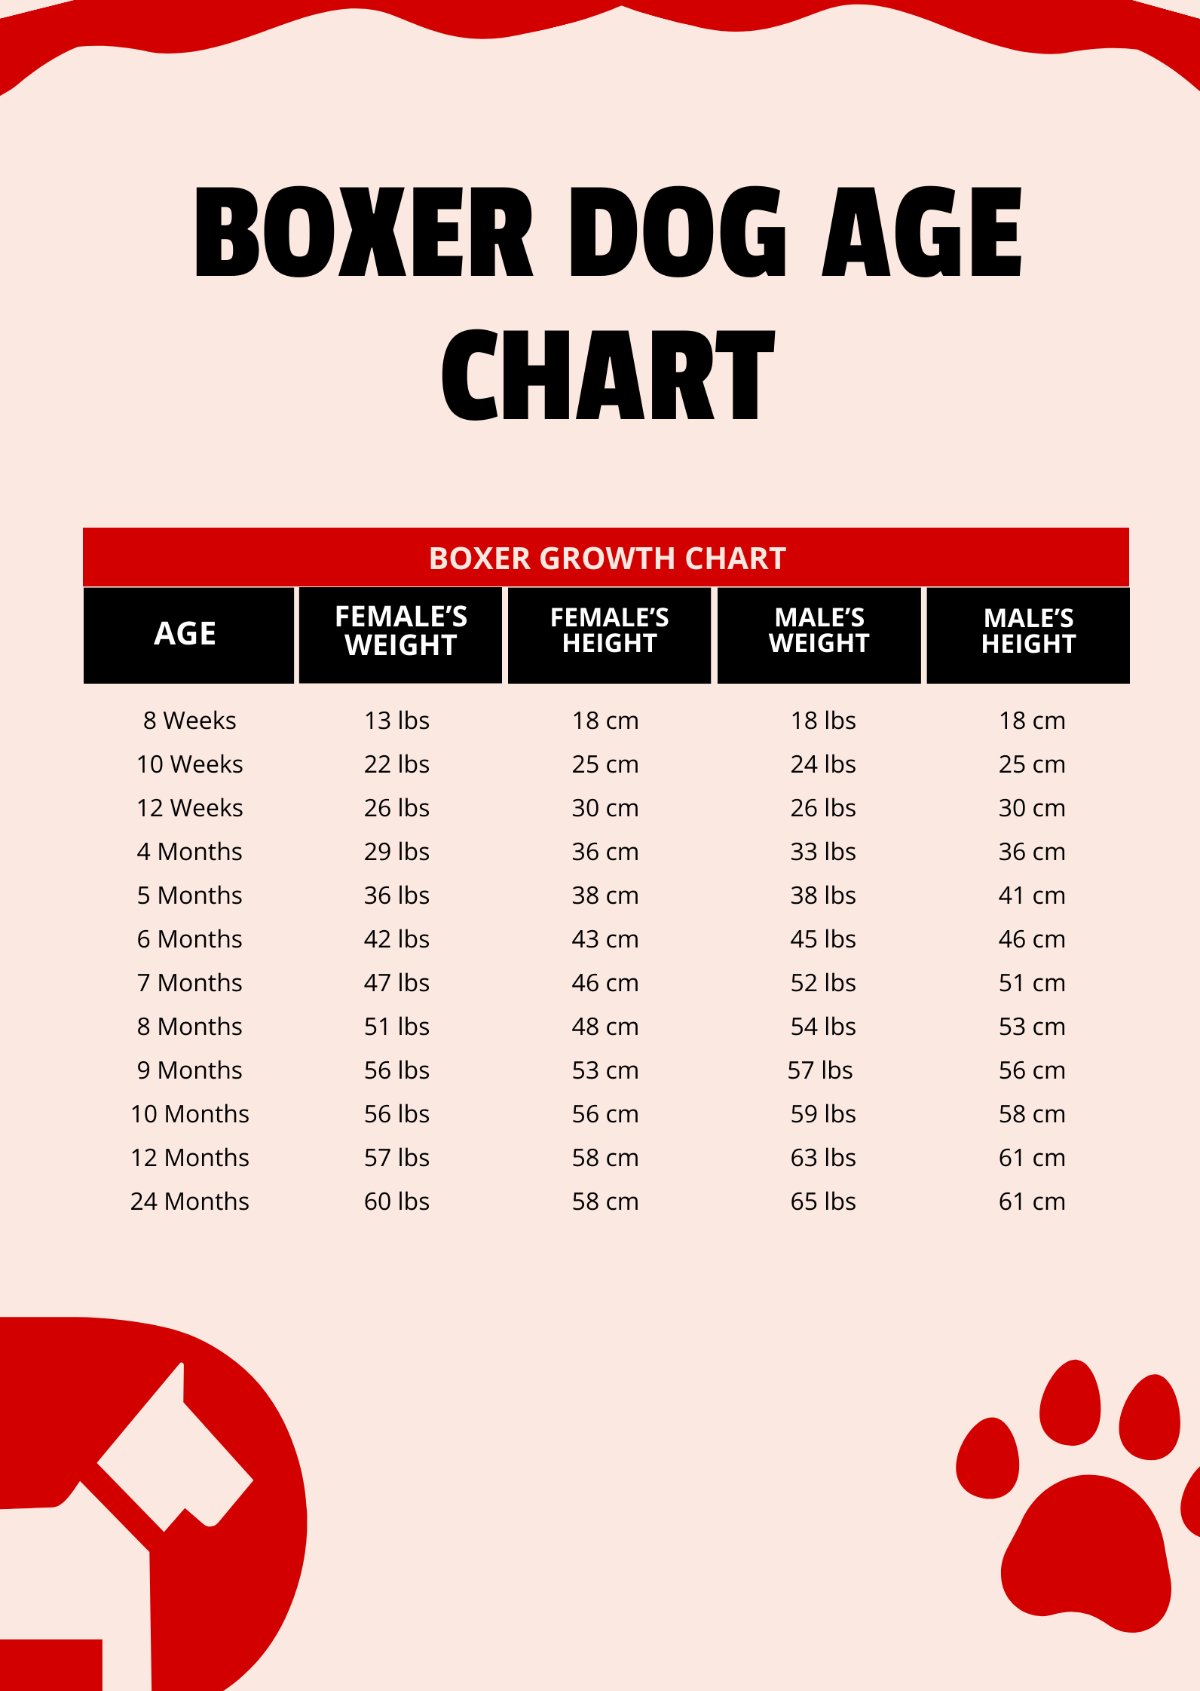 Boxer Dog Age Chart Template